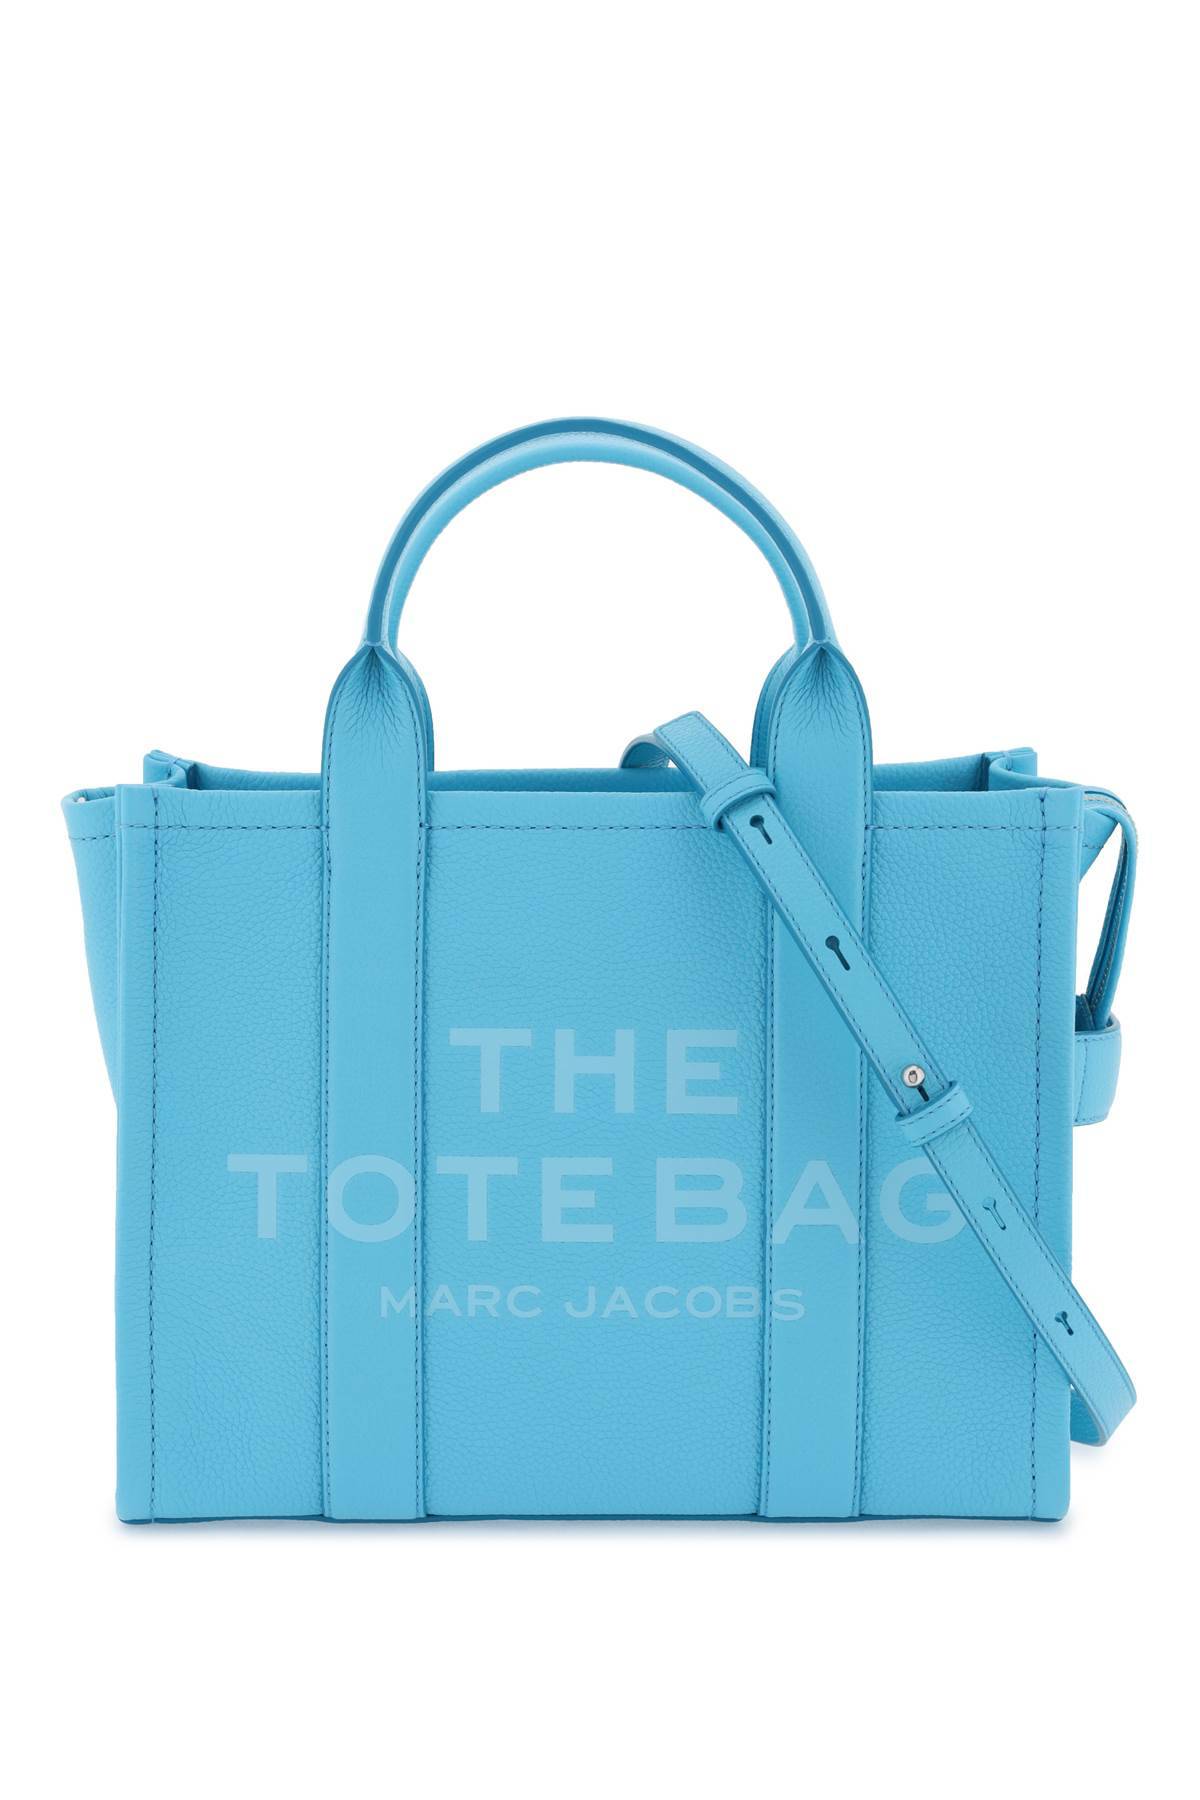 Marc Jacobs MARC JACOBS 'the leather medium tote bag'